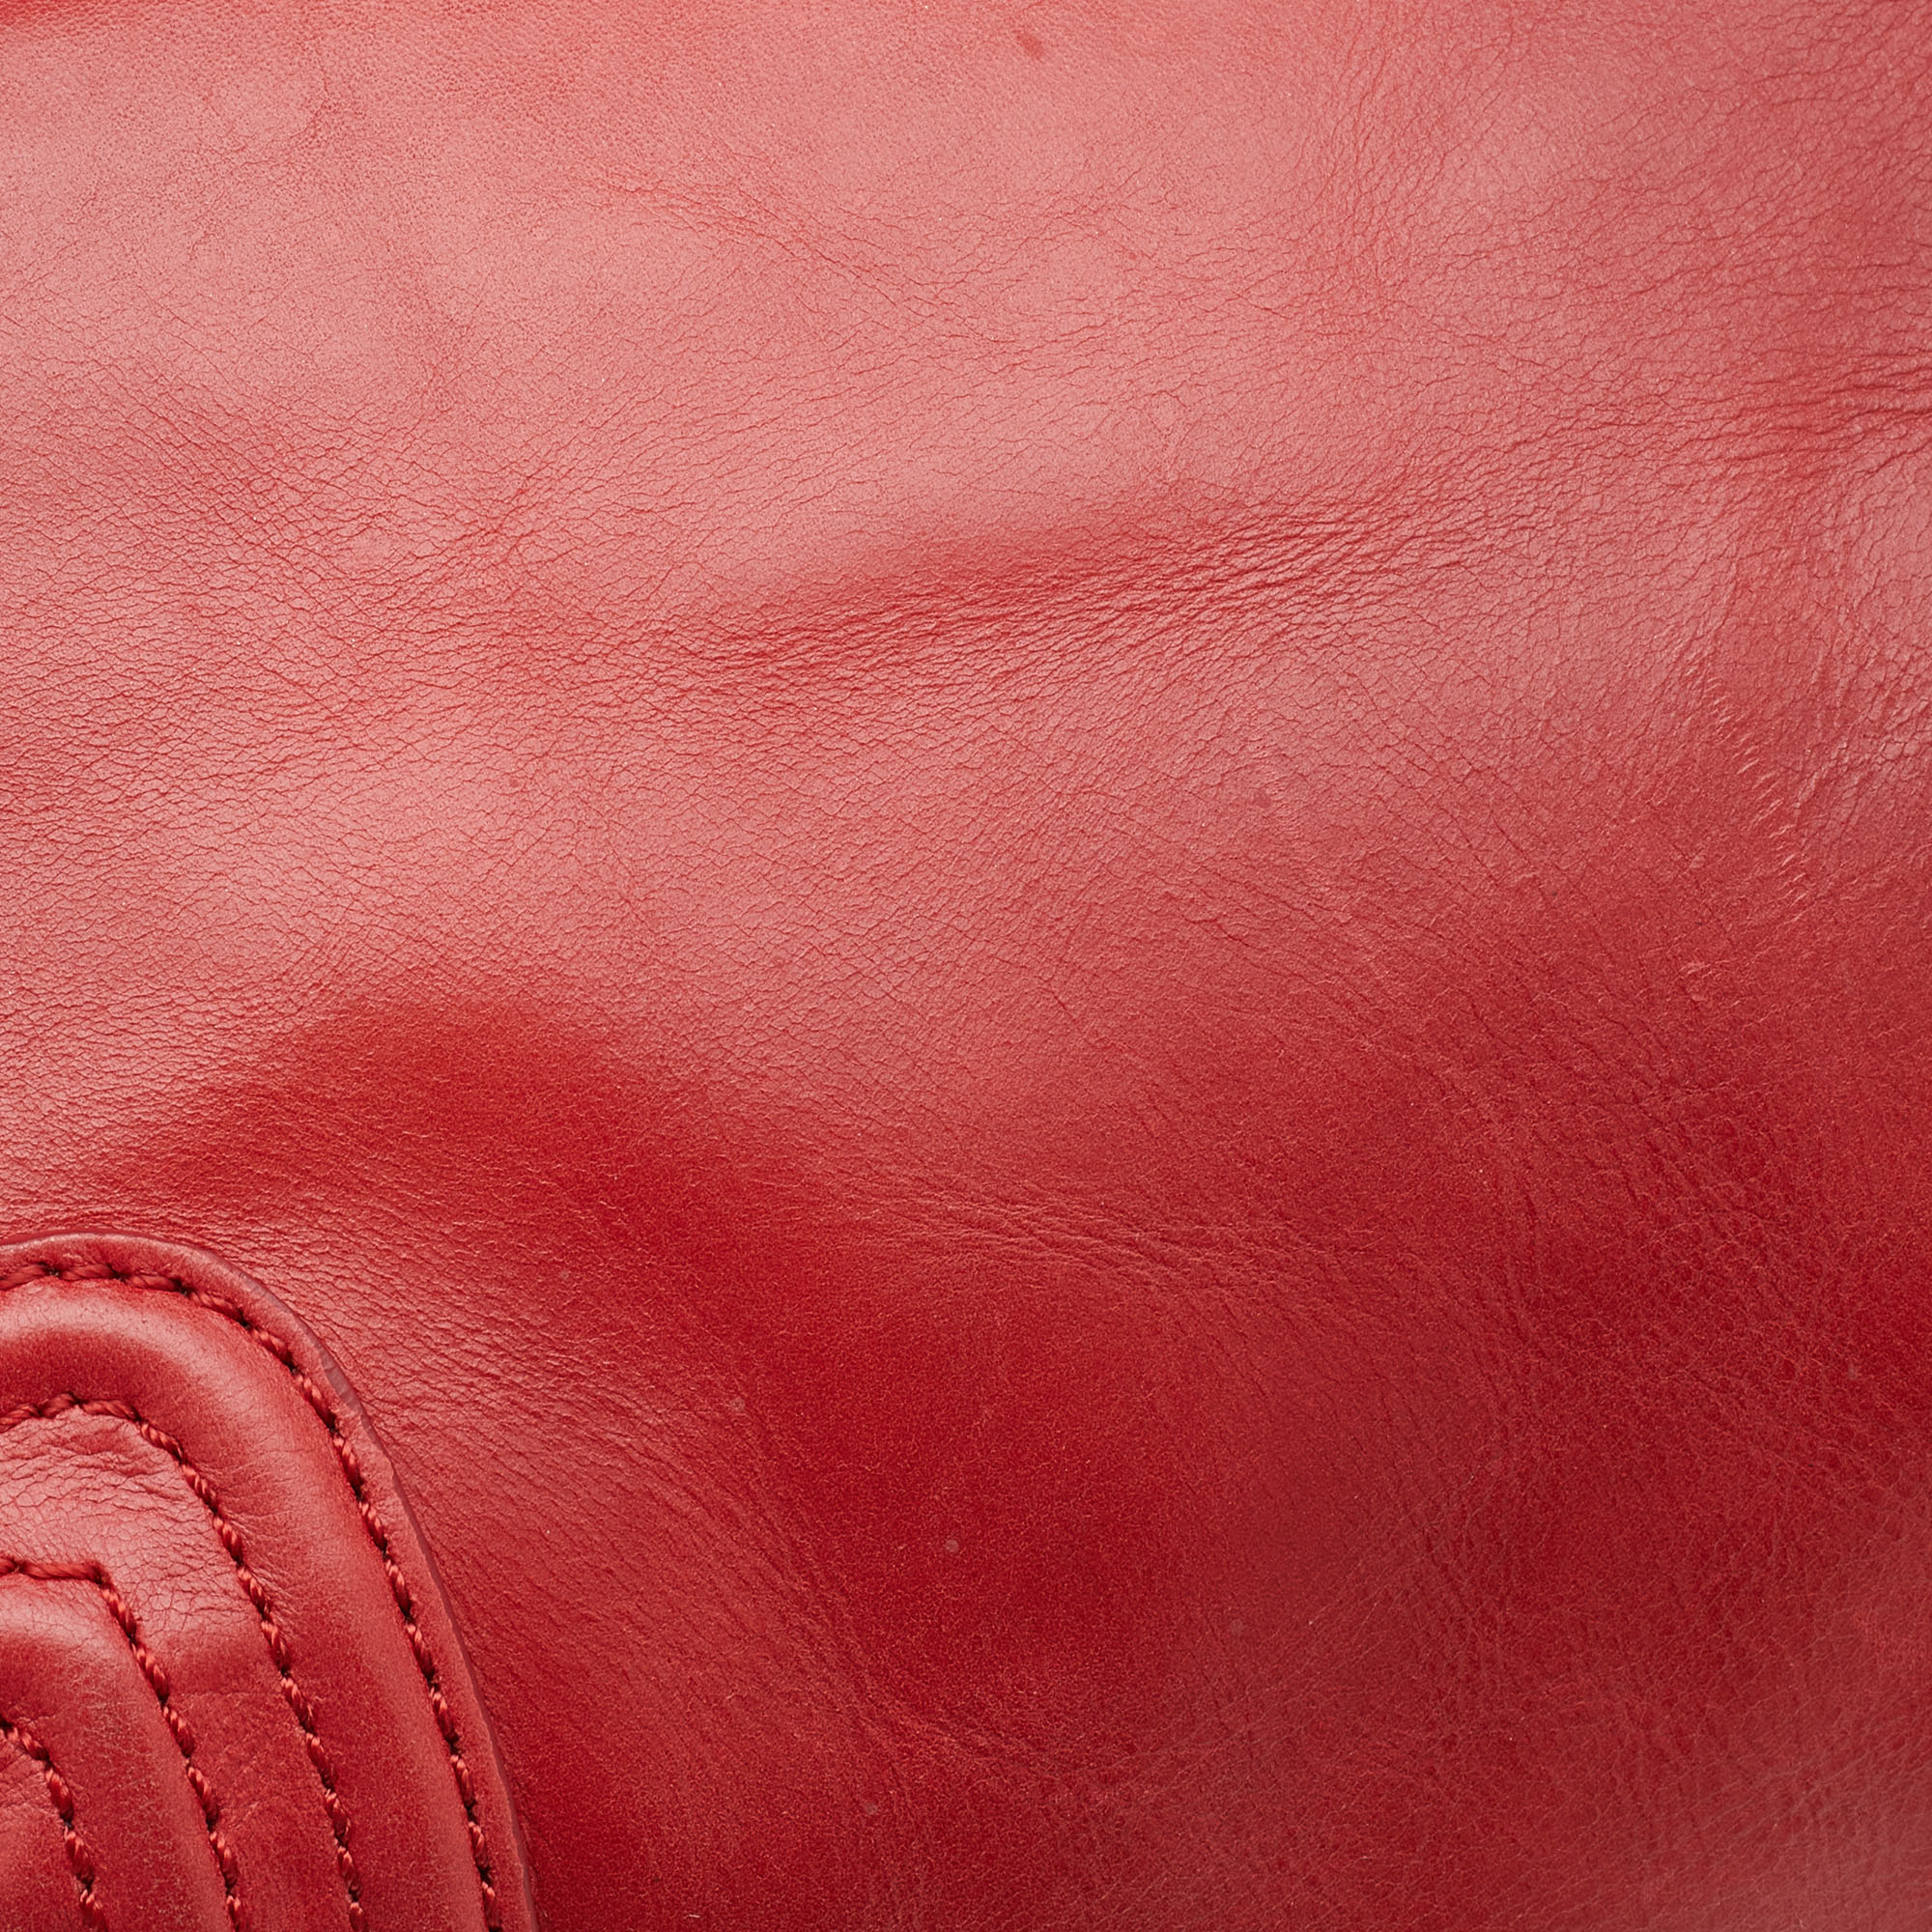 DKNY Red Leather Hobo